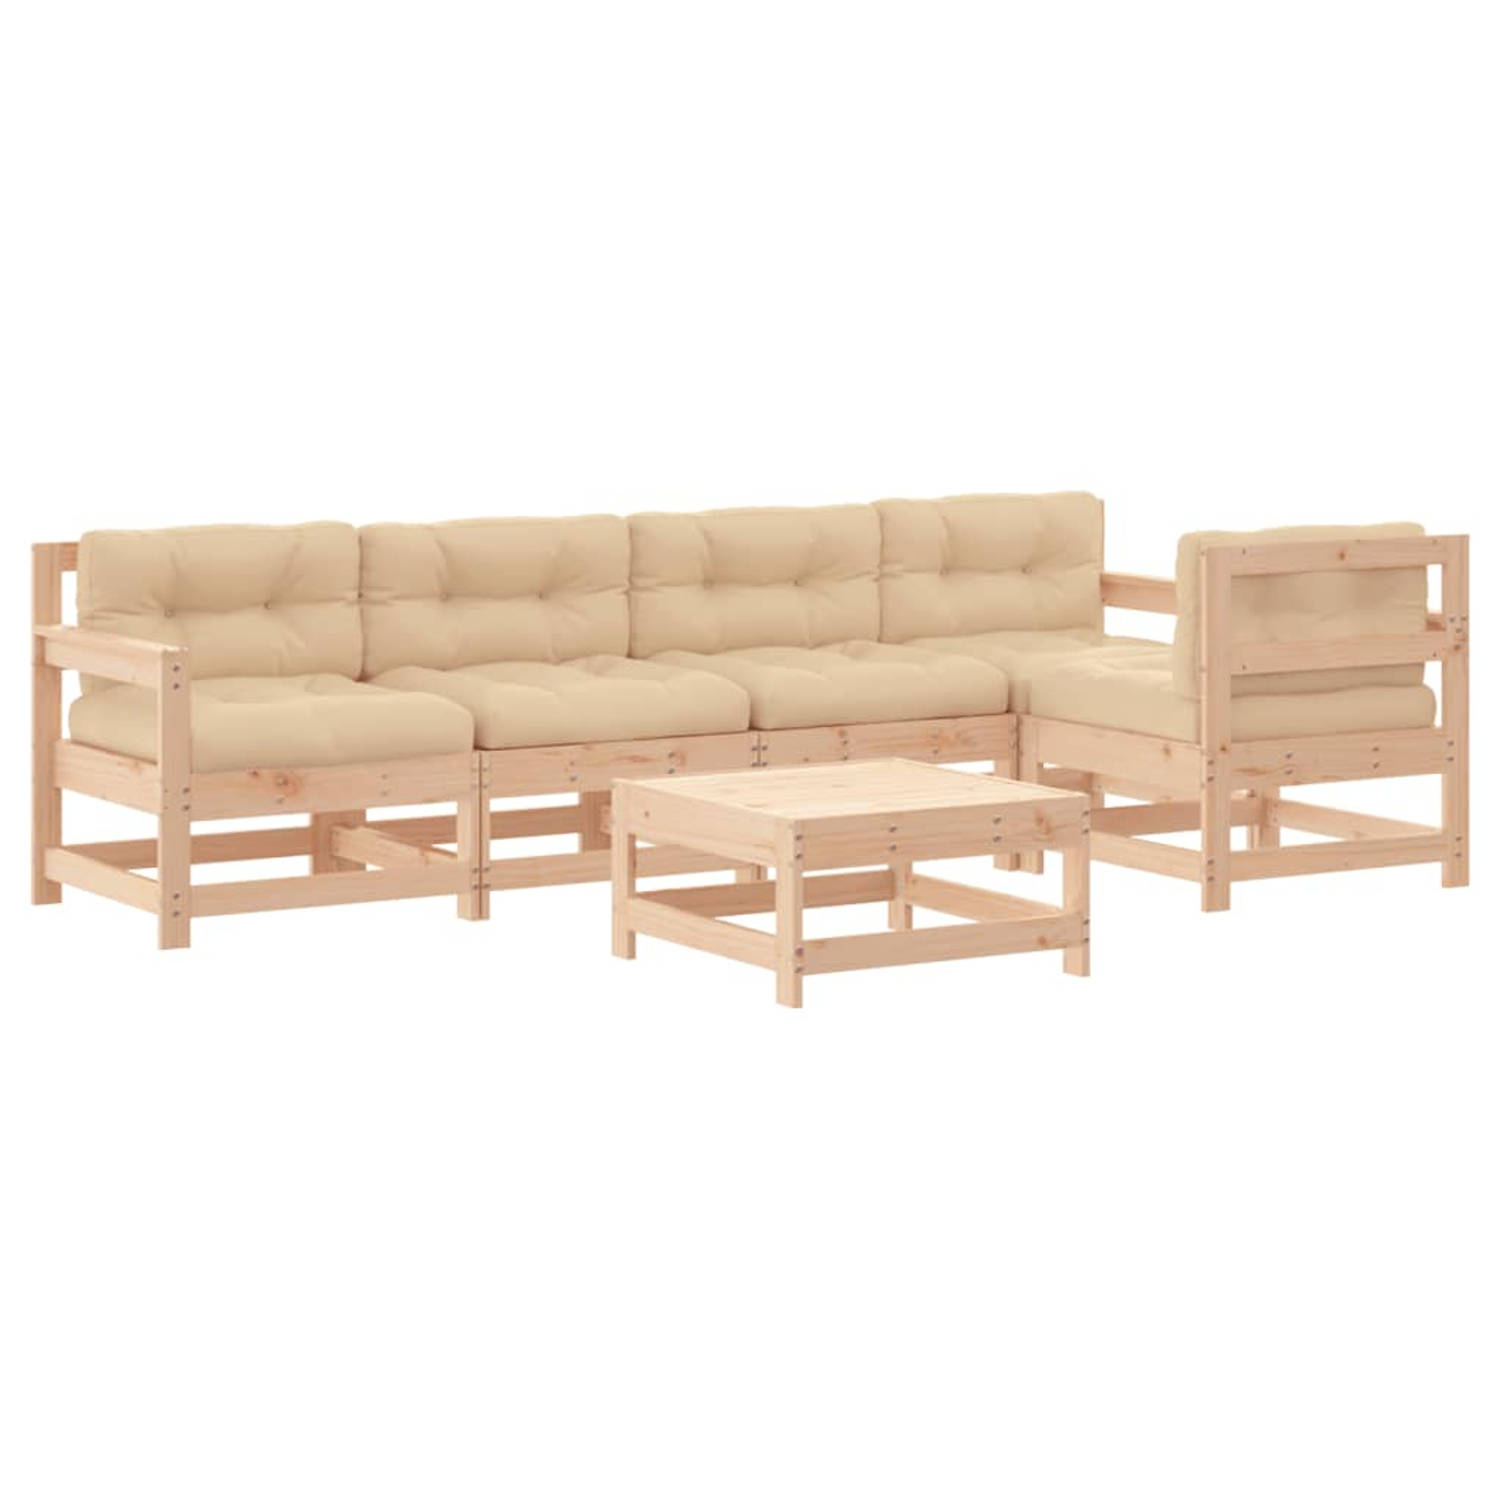 The Living Store Loungeset Grenenhout - Modulair - 62x62x70.5 cm - Beige